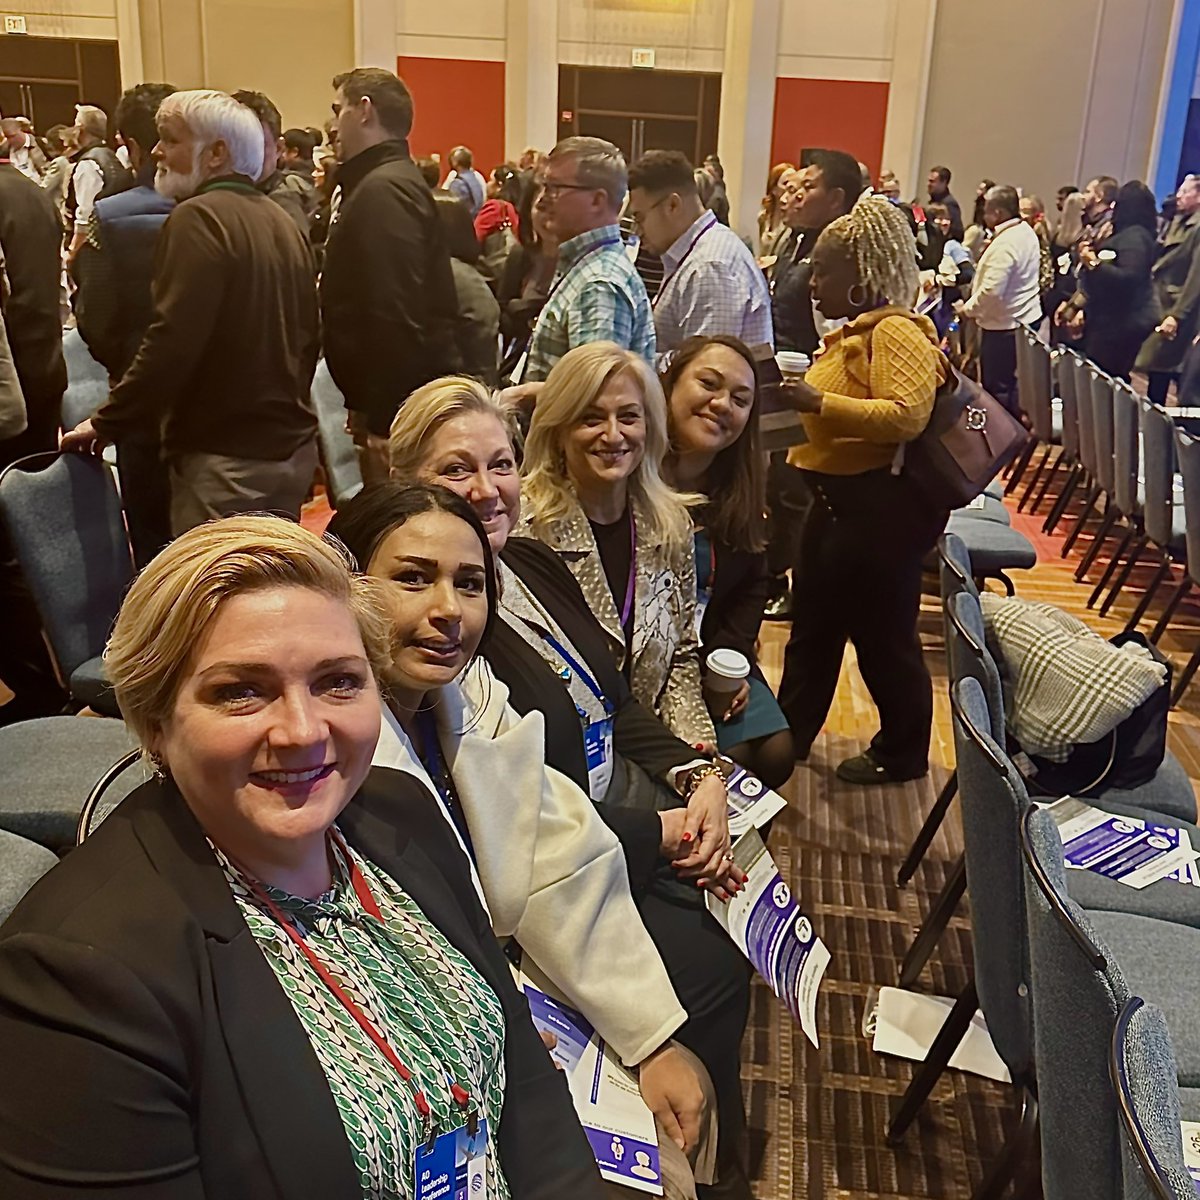 Always a great synergy when connecting with fellow leaders at the AO Leadership Conference 2024! #goodleadstheway #beingunited #UnitedAO2024